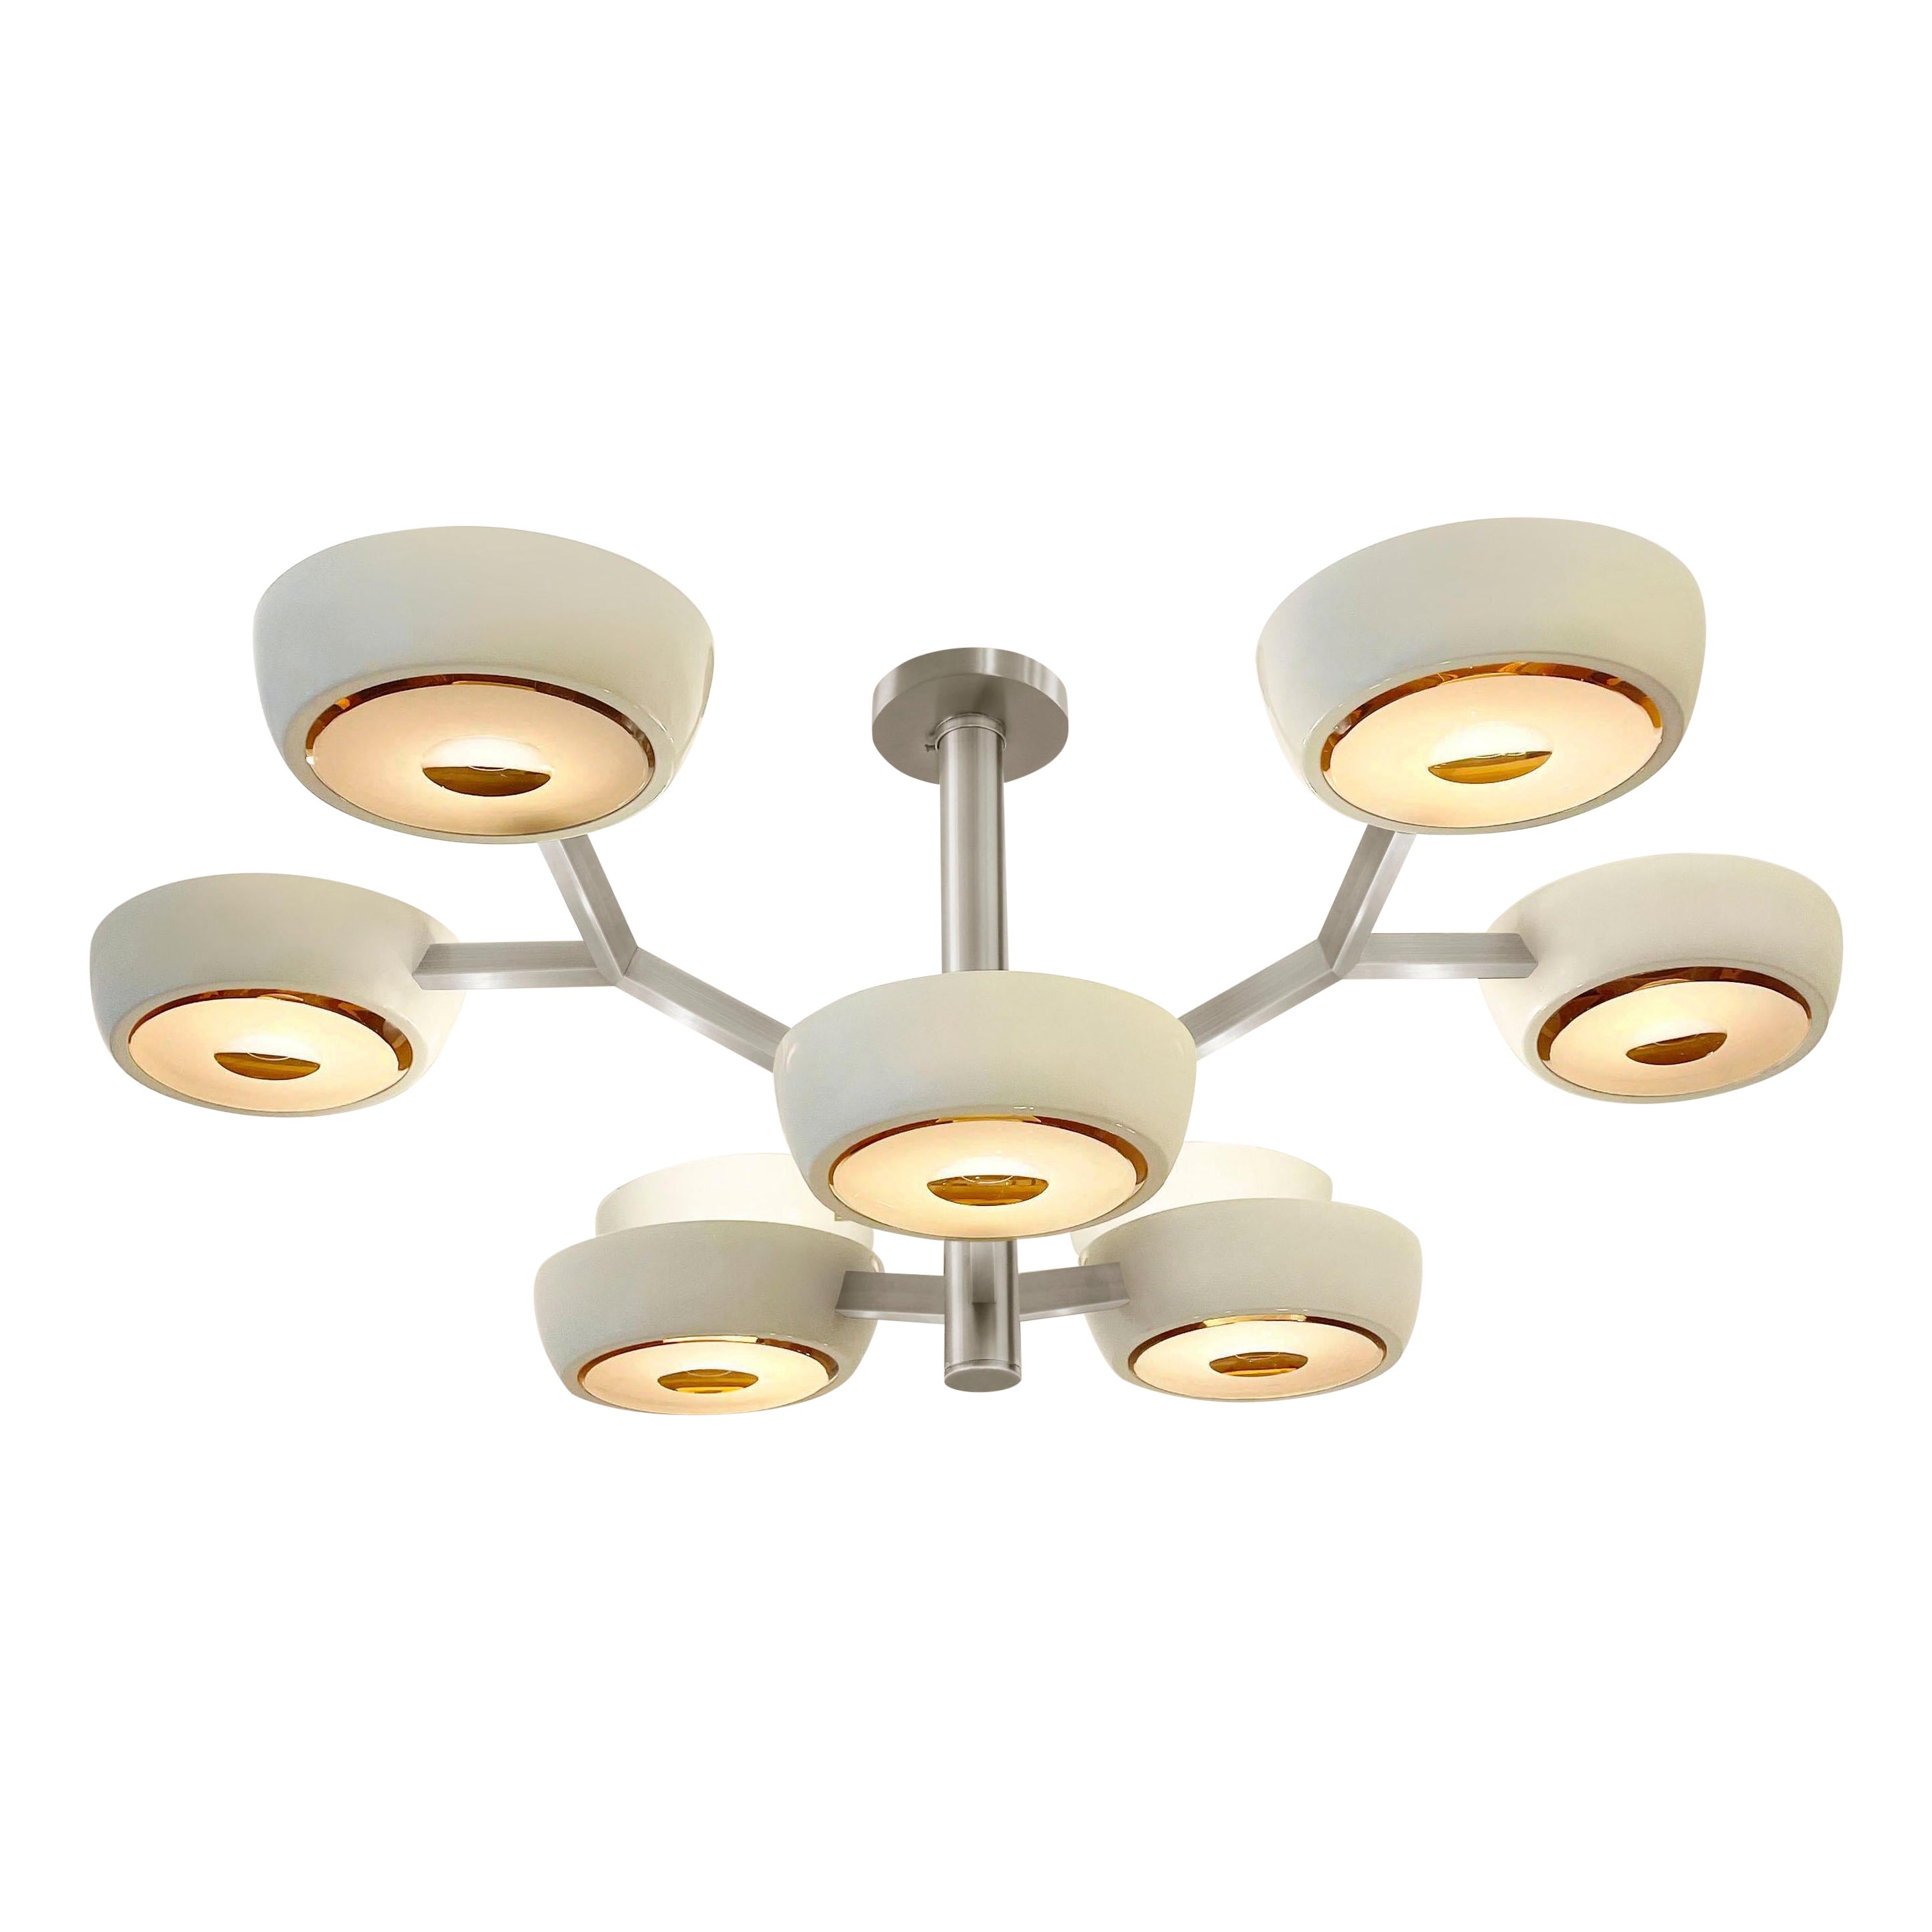 Rose Ceiling Light by Gaspare Asaro-Satin Nickel Finish For Sale